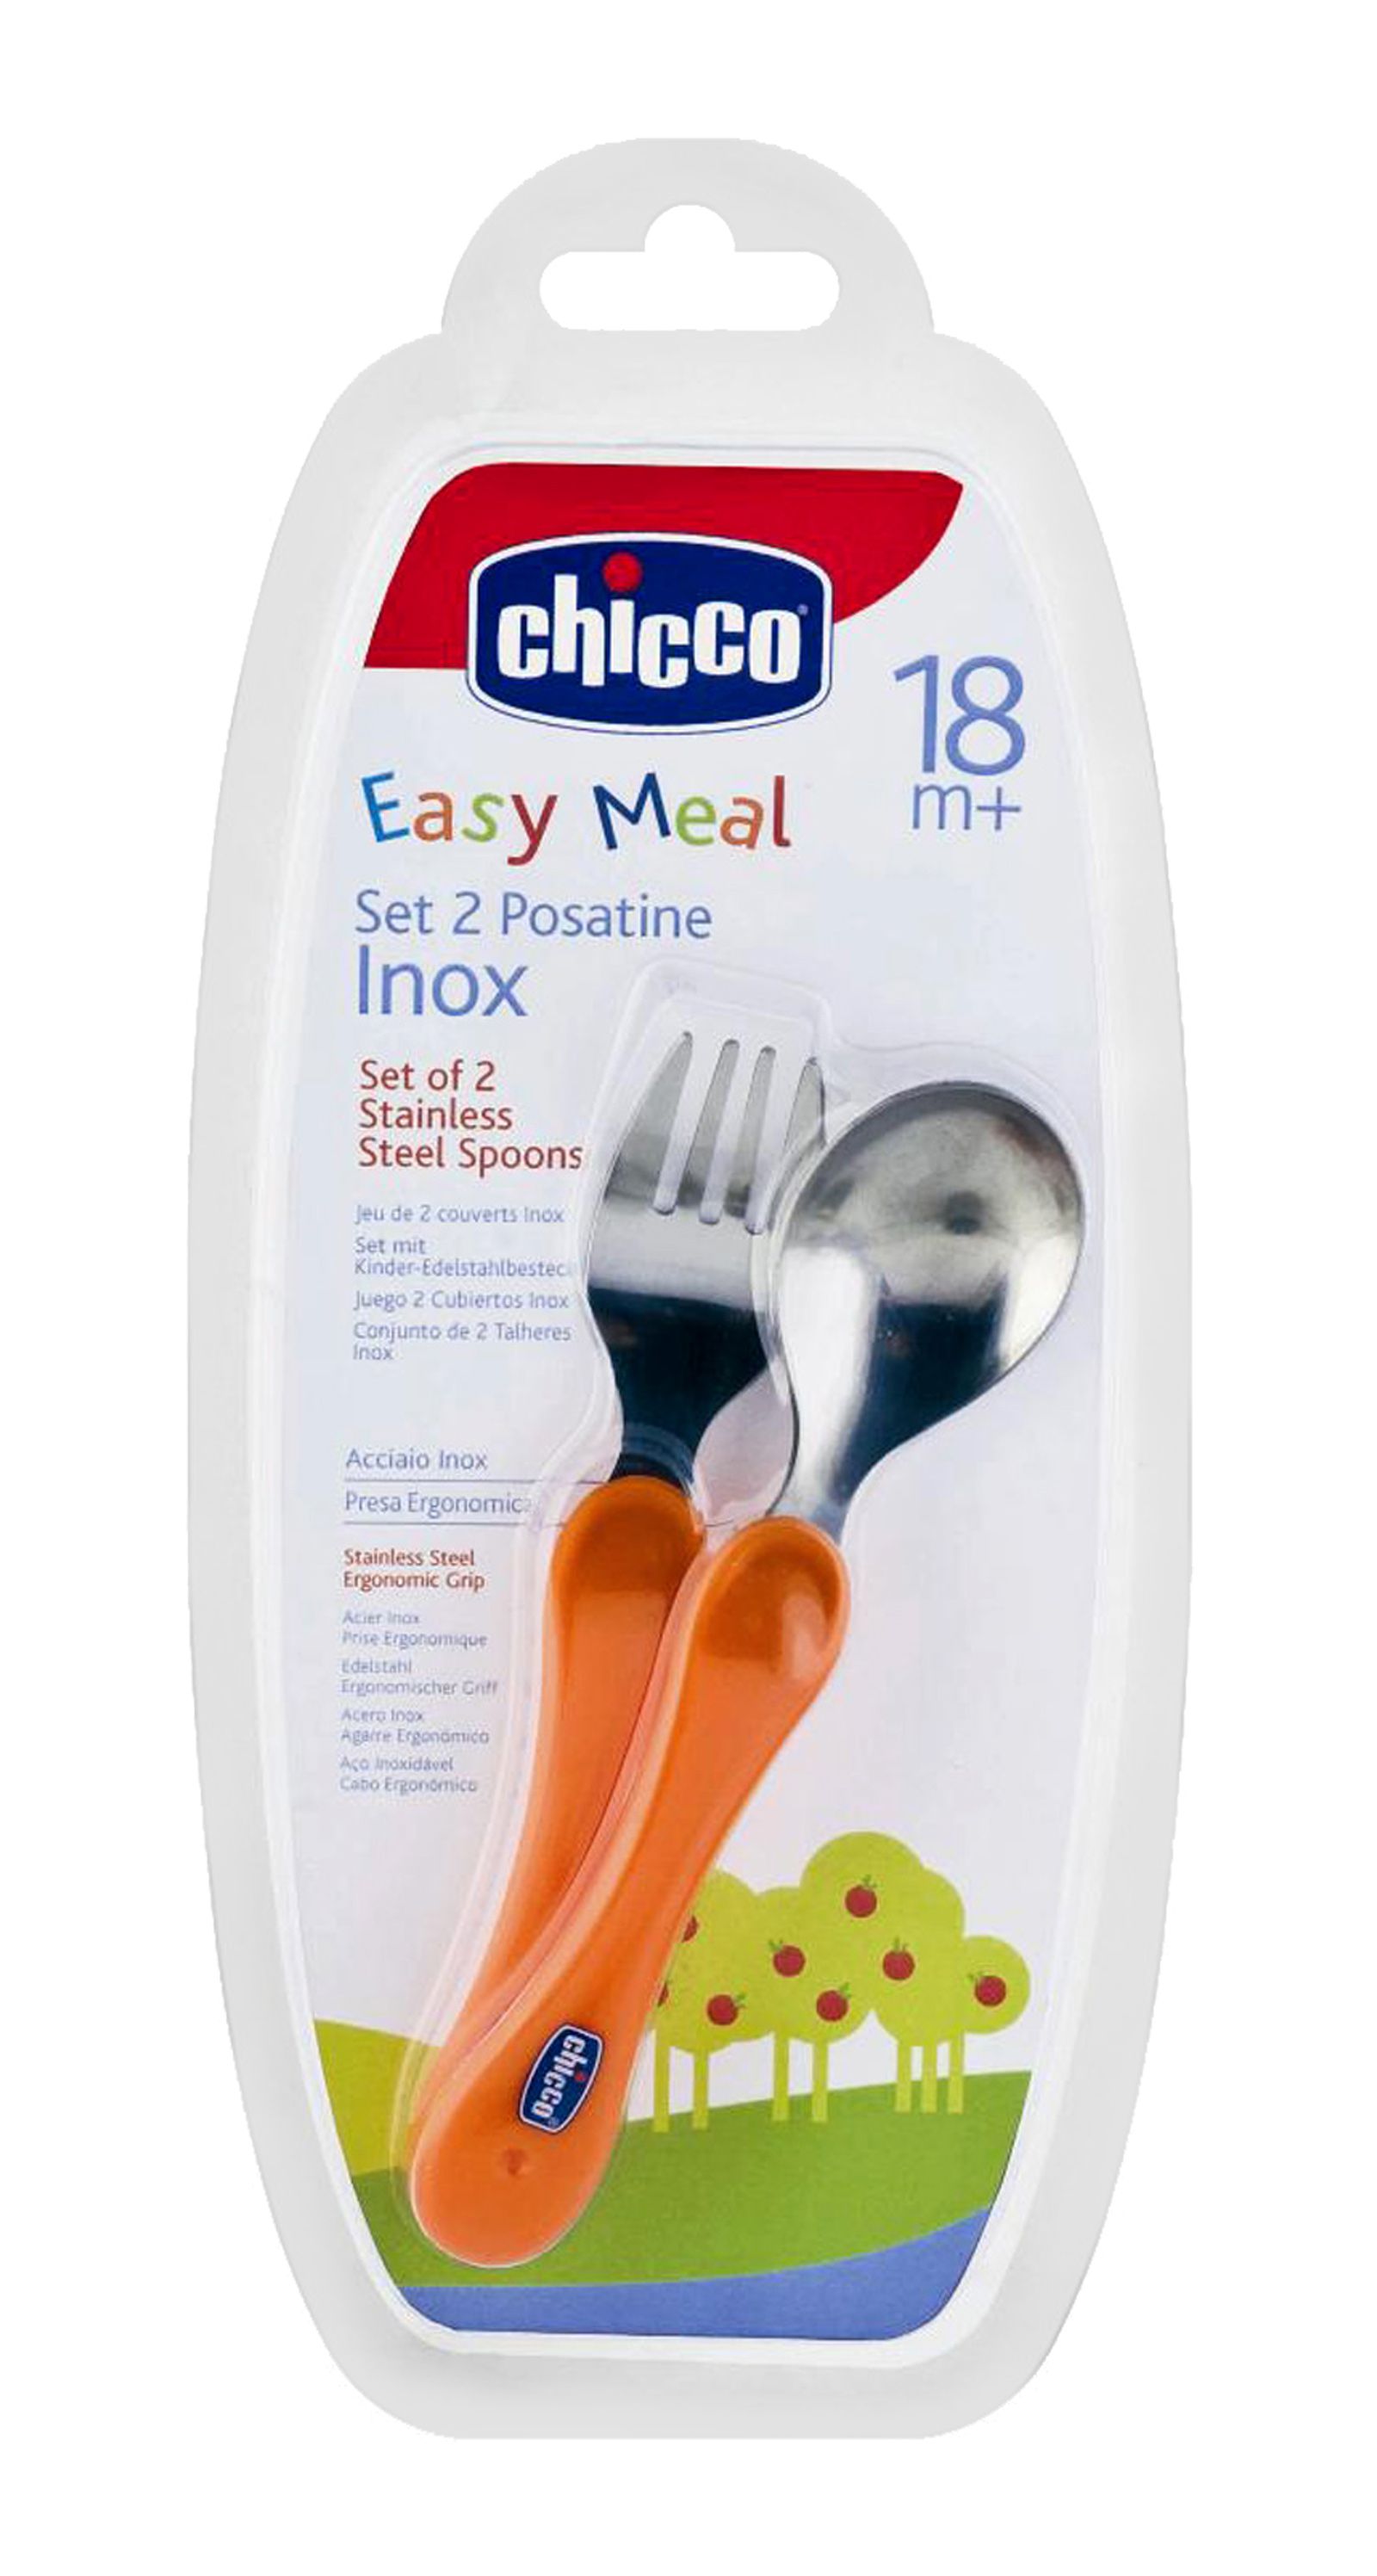 Chicco - Set of 2 Stainless Steel Spoons